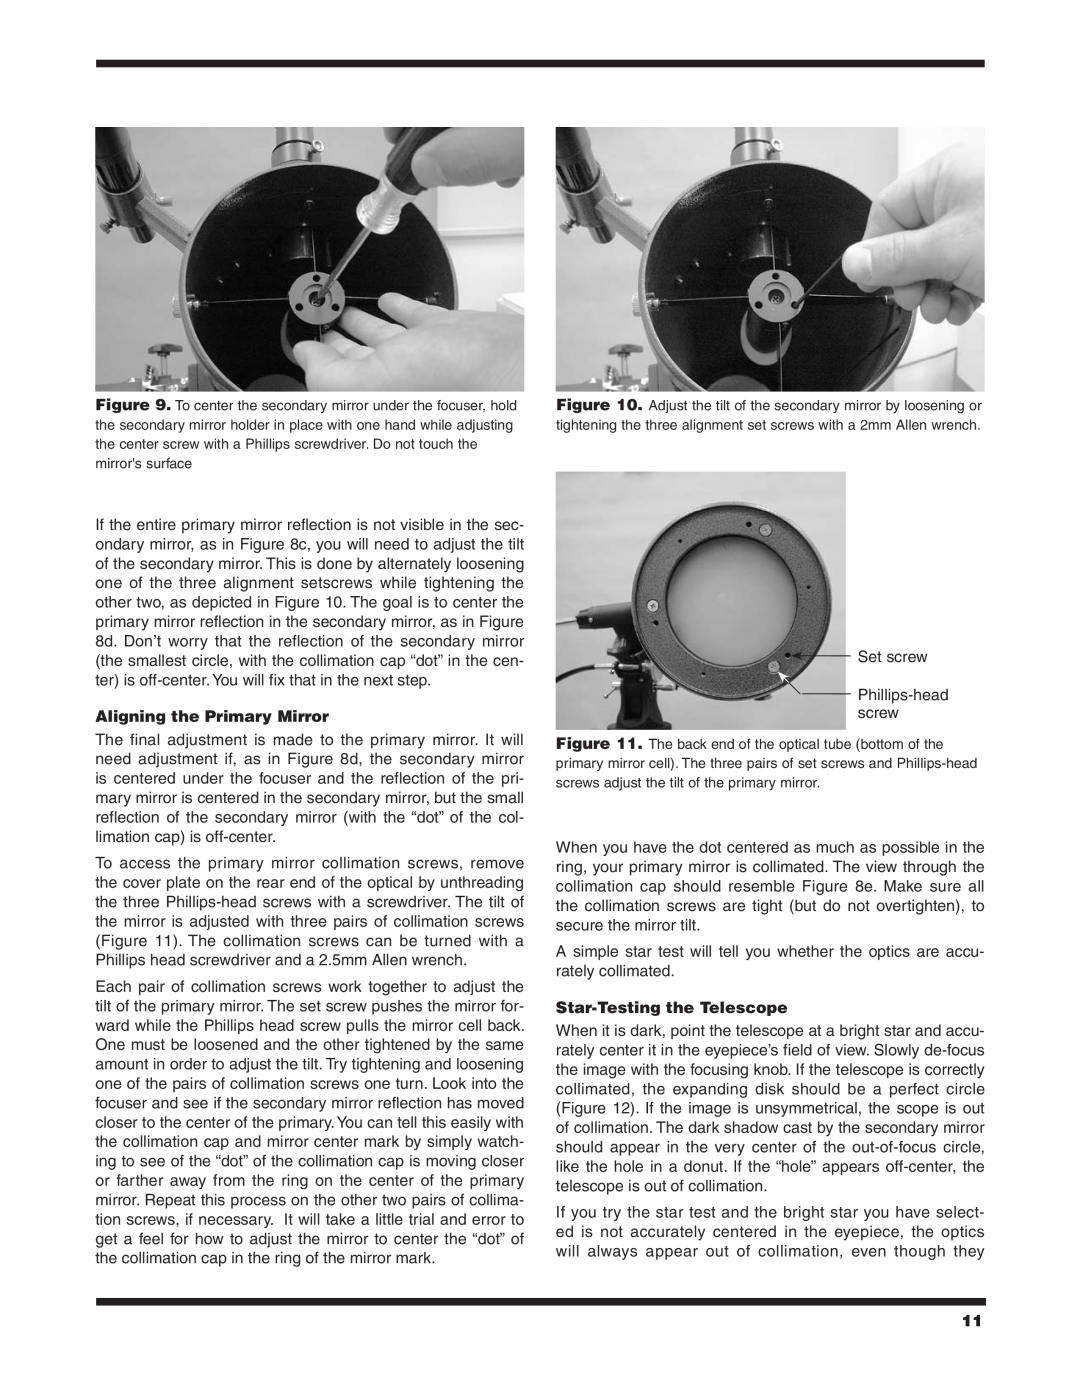 Orion 130ST EQ instruction manual Aligning the Primary Mirror, Star-Testing the Telescope 